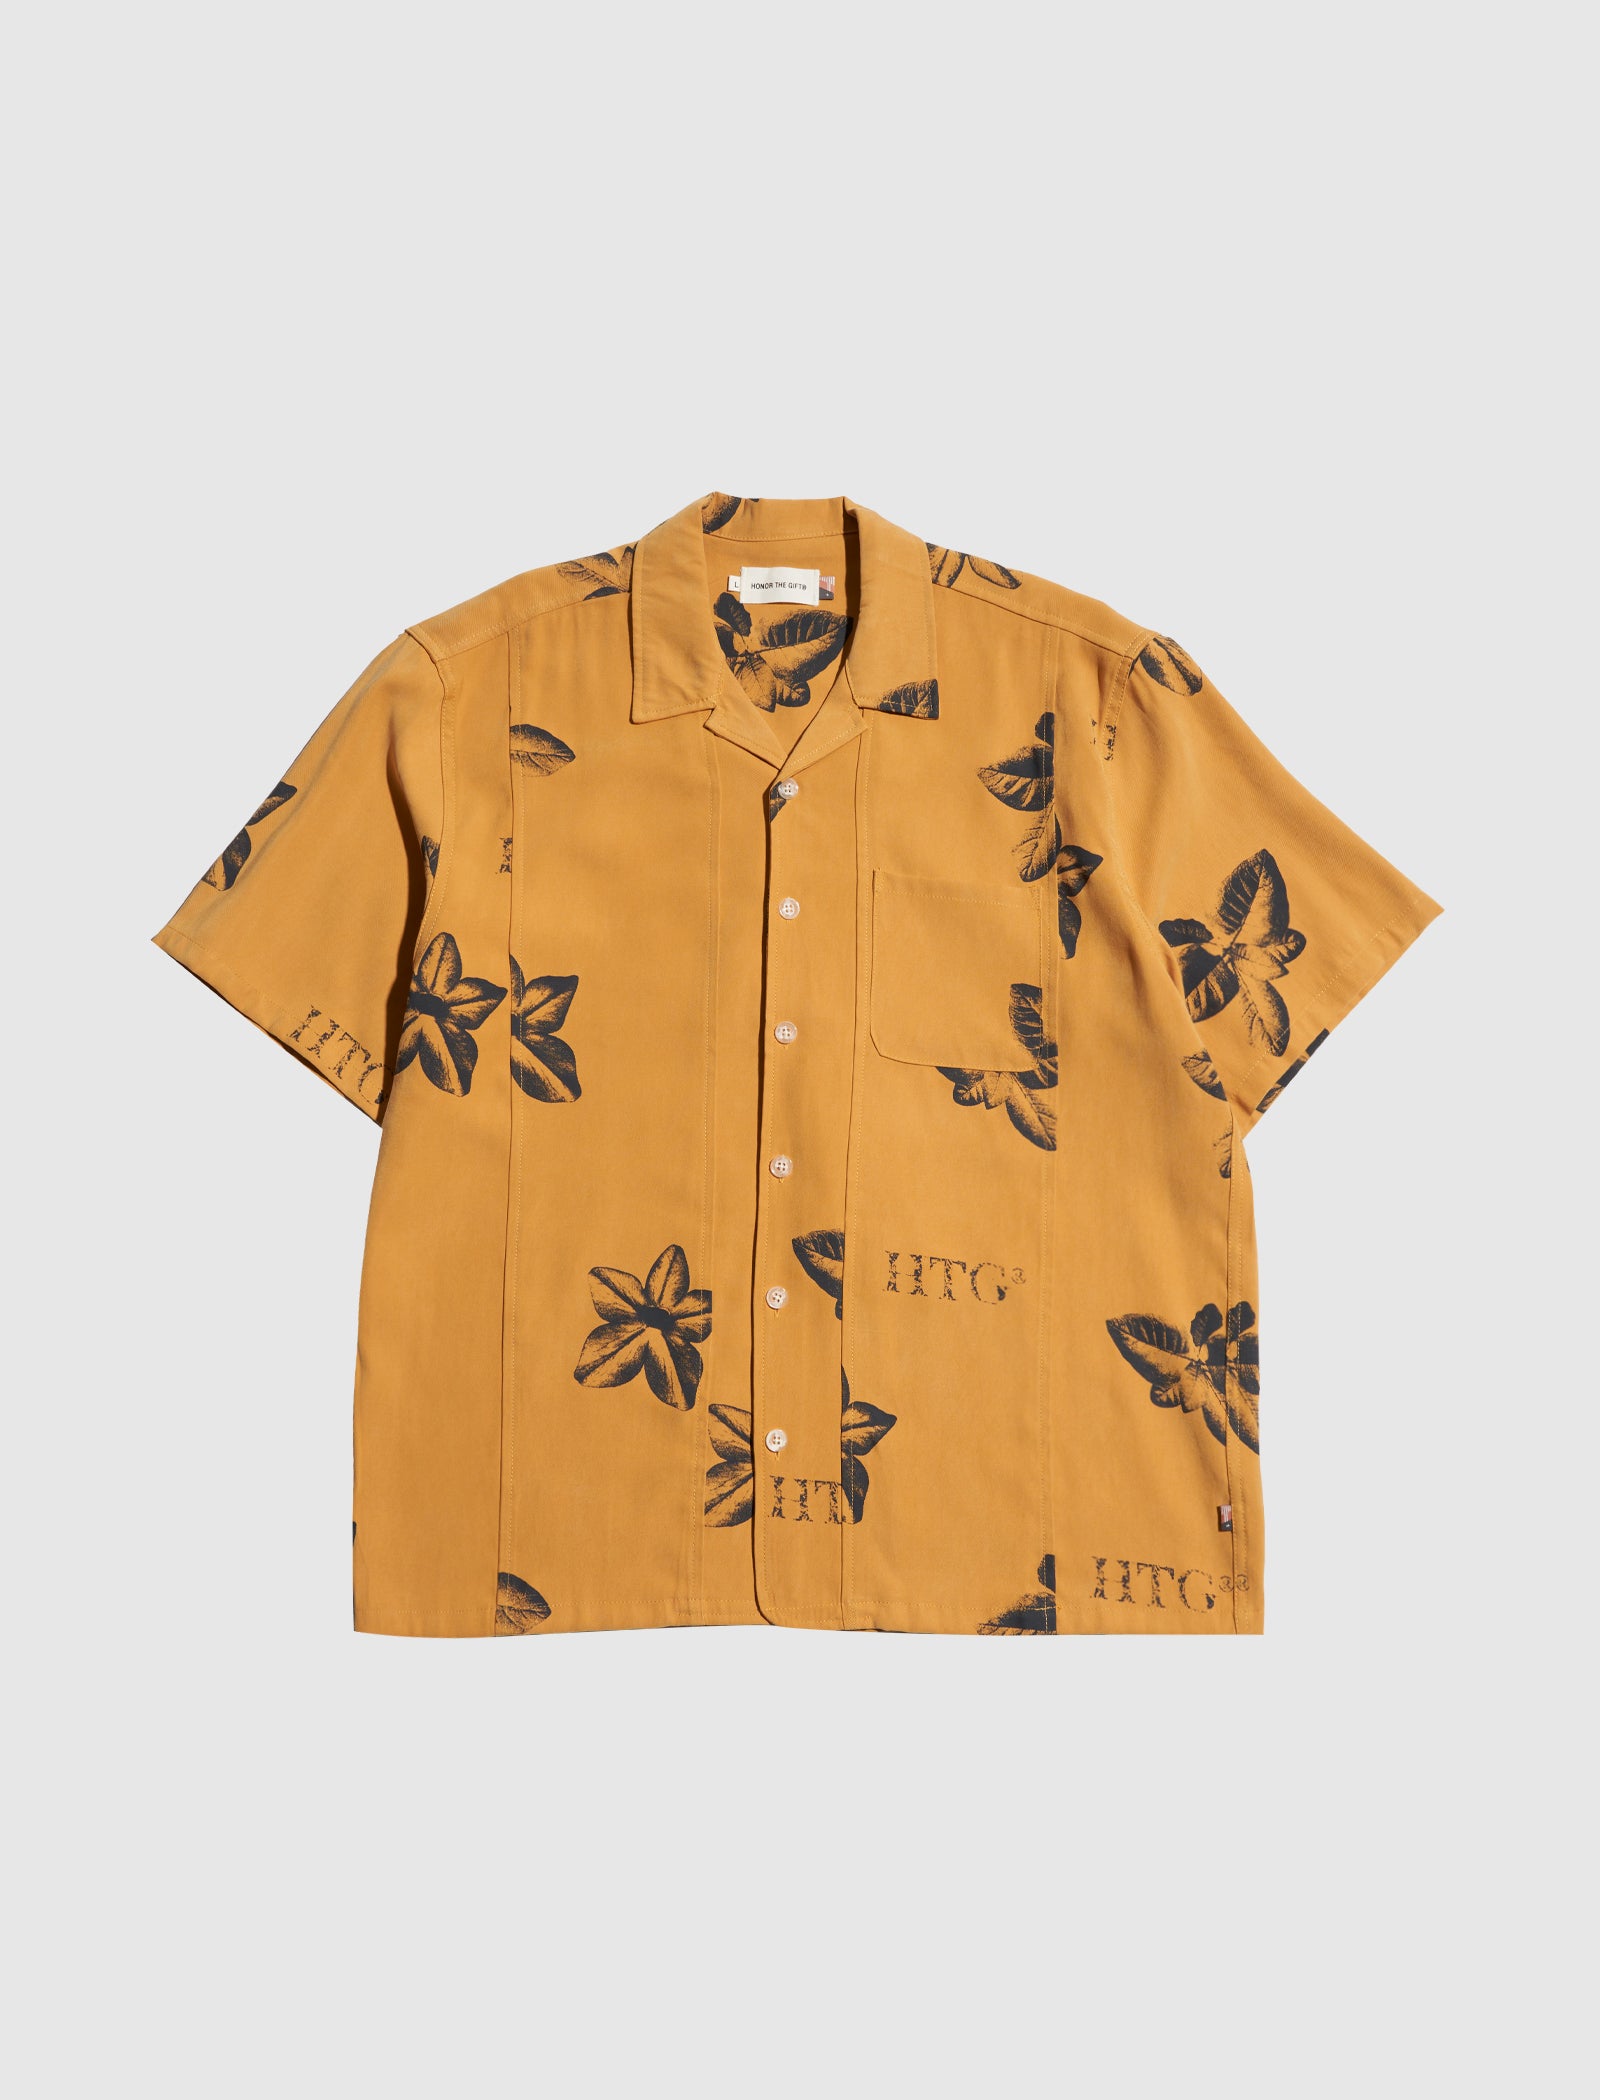 HONOR THE GIFT TOBACCO BUTTON-UP SHIRT